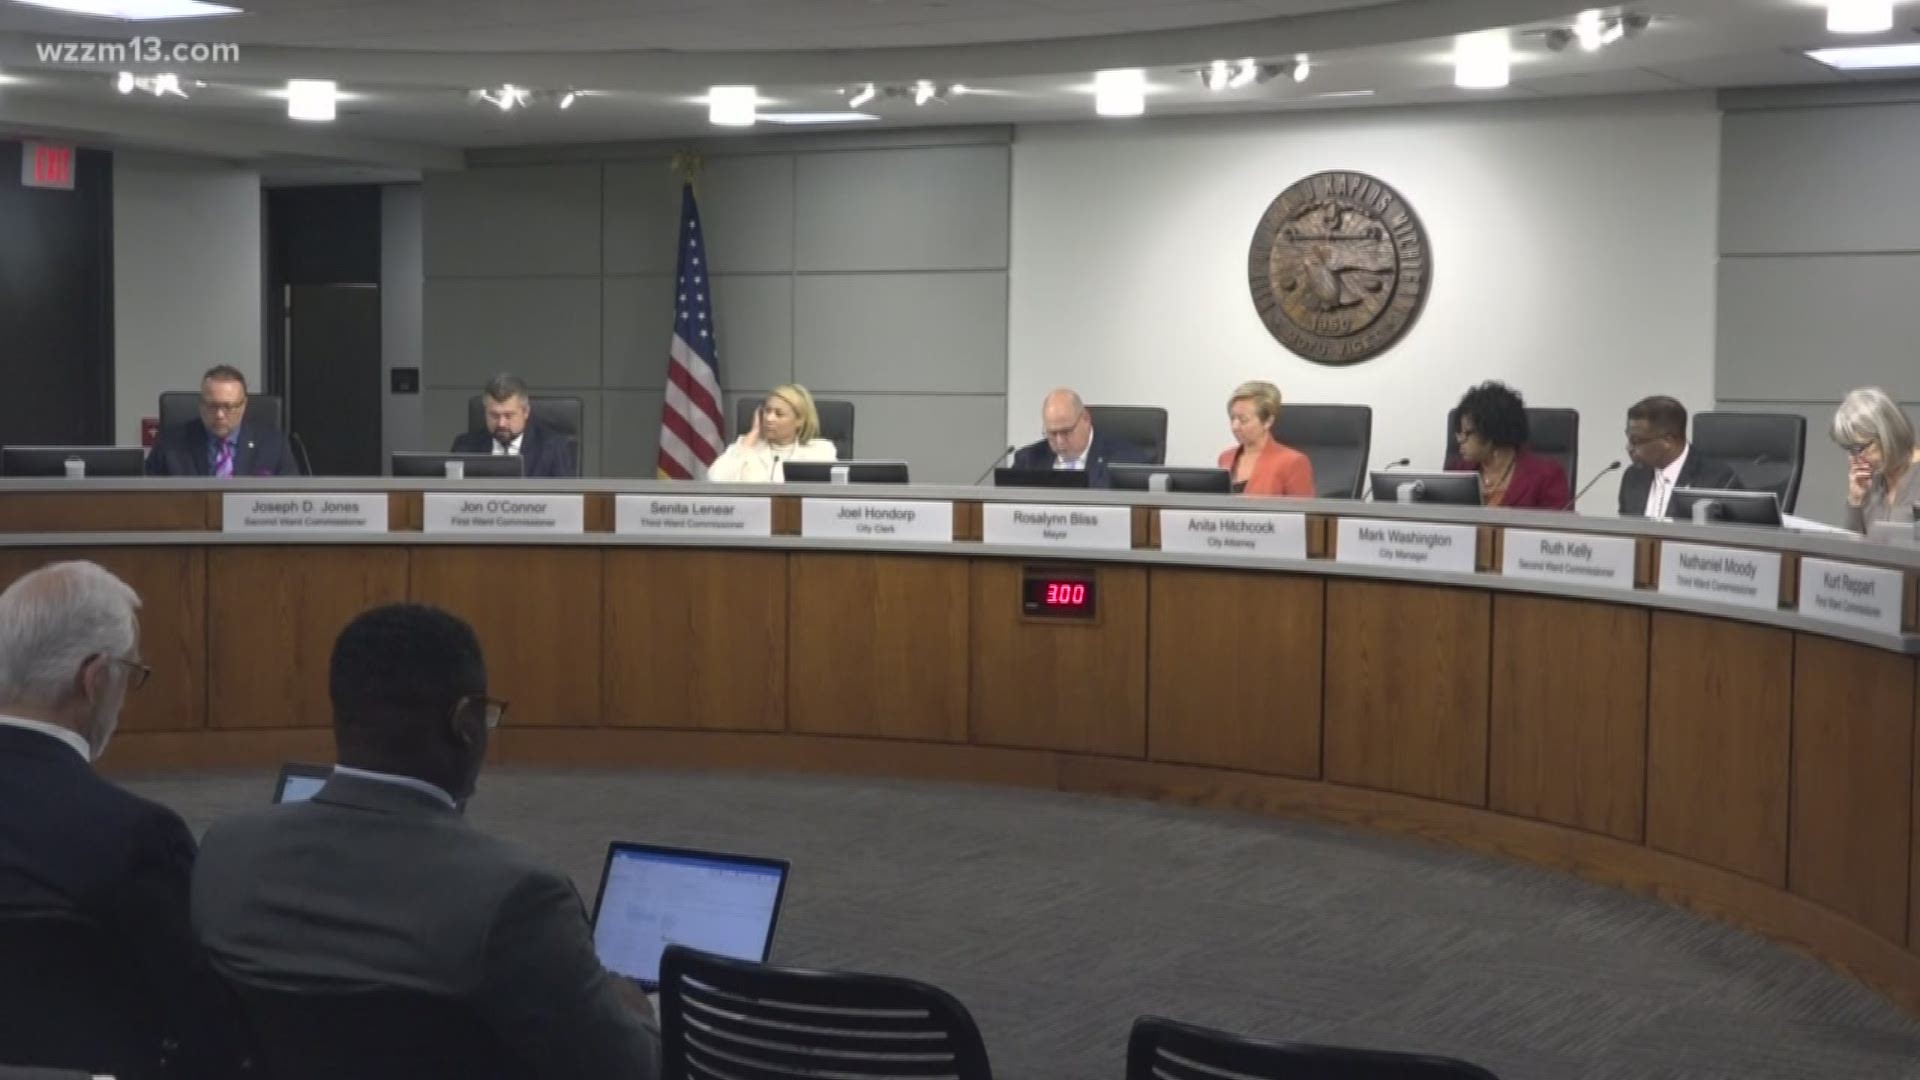 City commissioners figuring out how to bring medical marijuana to GR